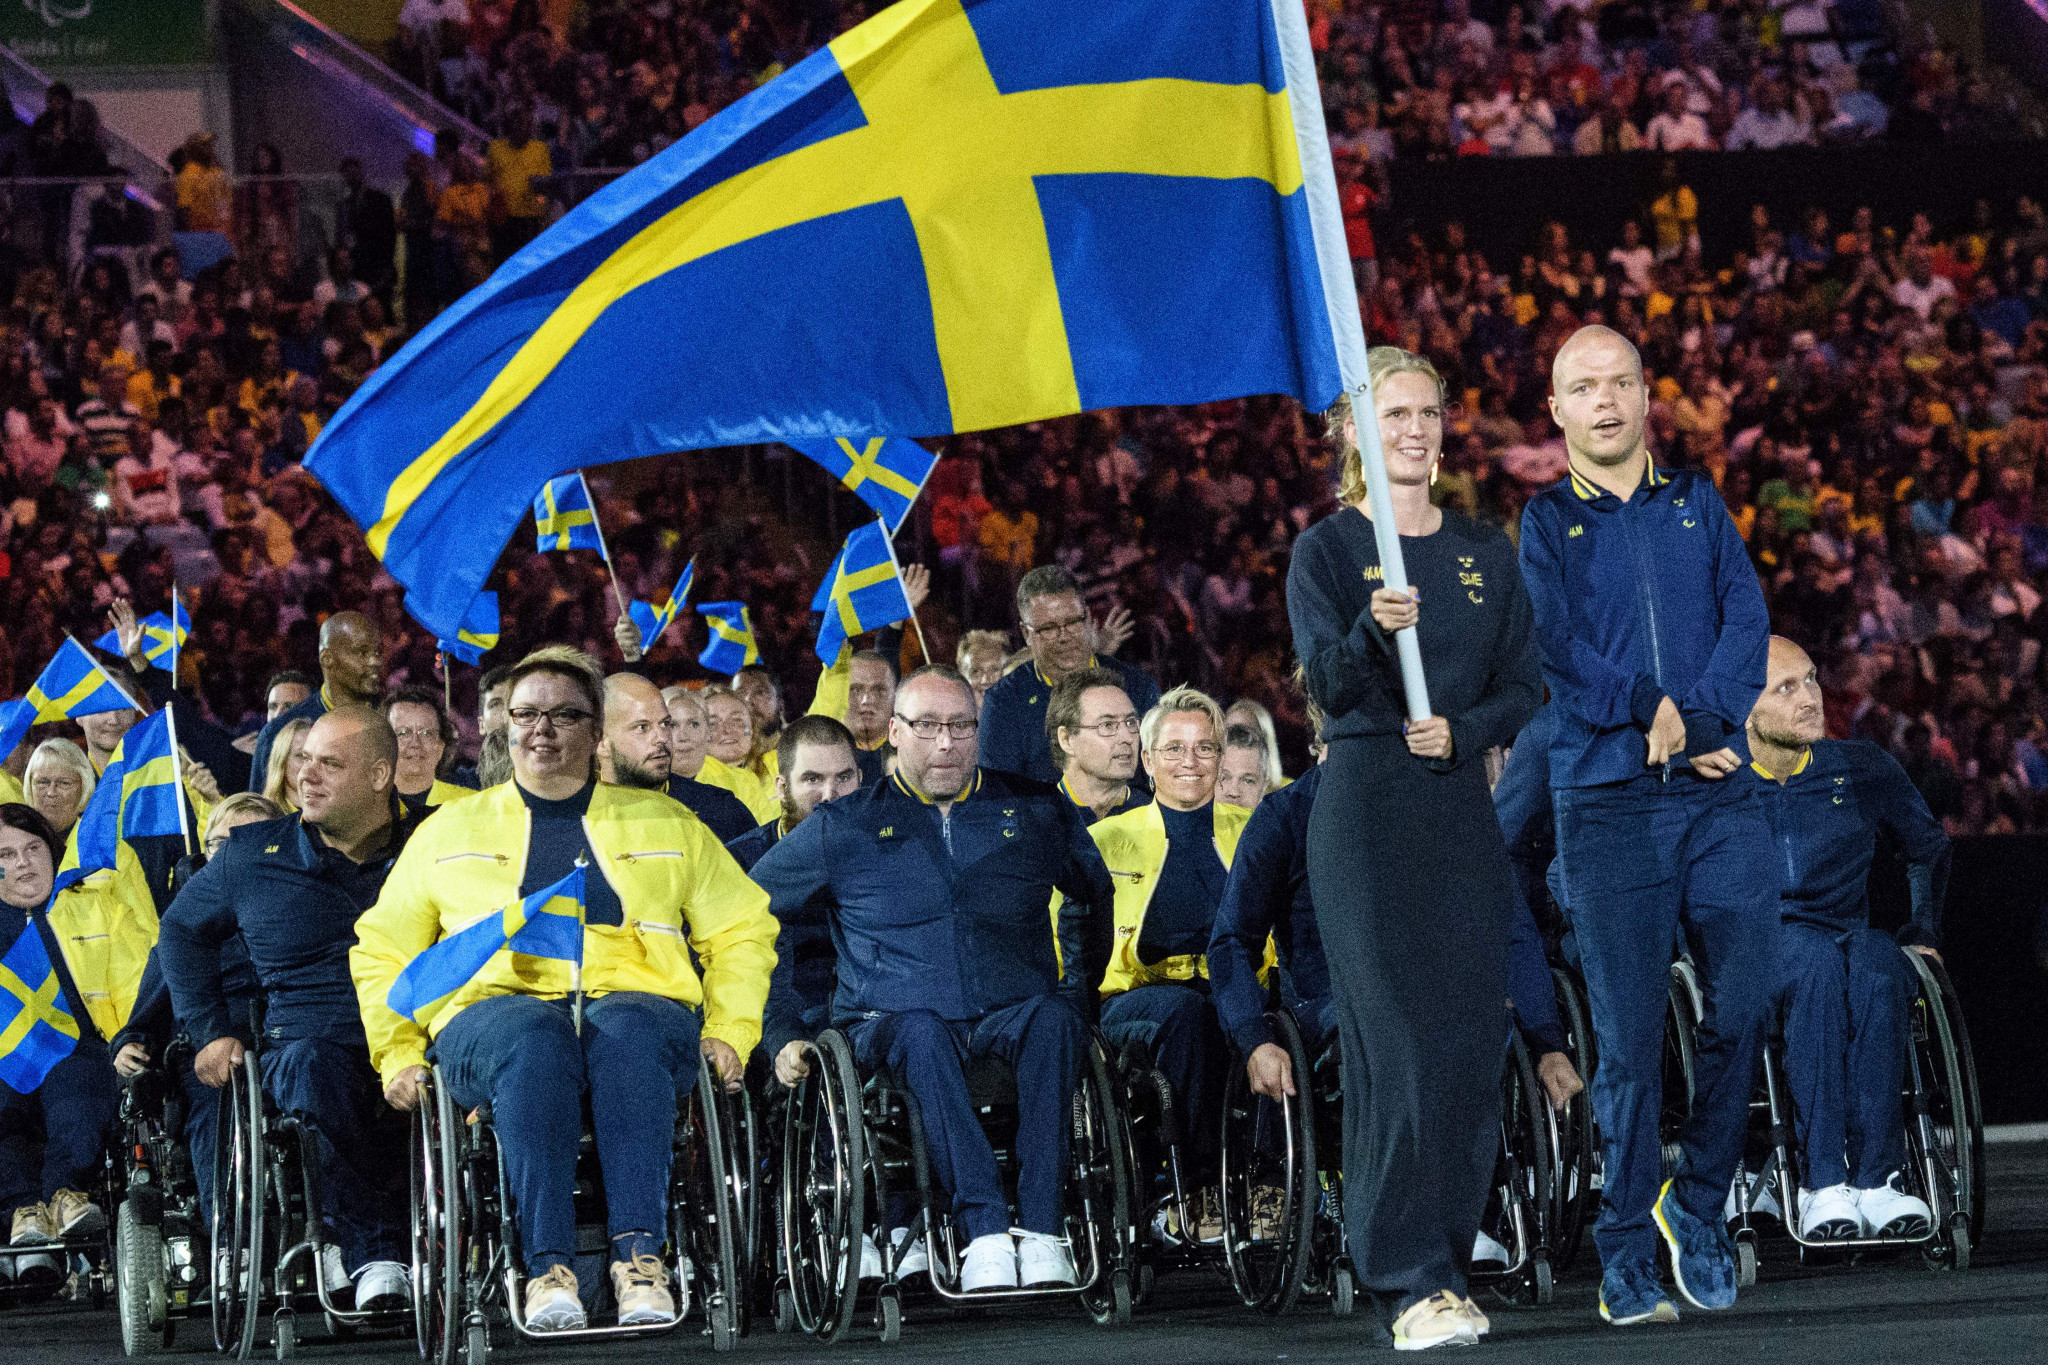 The Swedish Paralympic Committee and JYSK have given athletes a financial boost in the run-up to Tokyo 2020 ©Getty Images